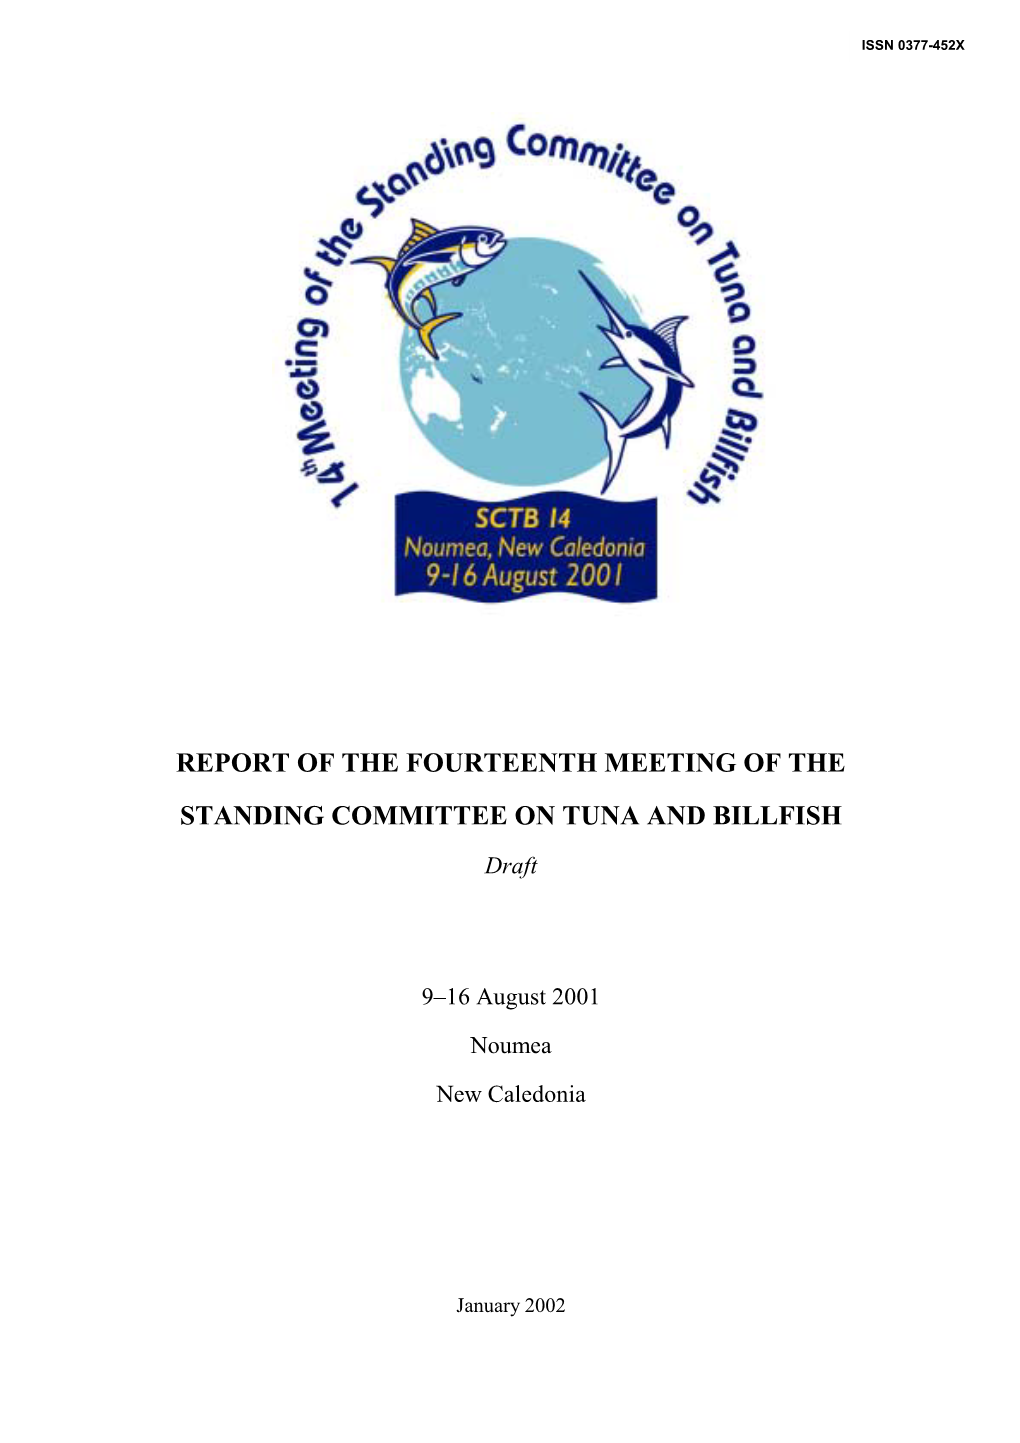 Report of the Fourteenth Meeting of the Standing Committee on Tuna and Billfish